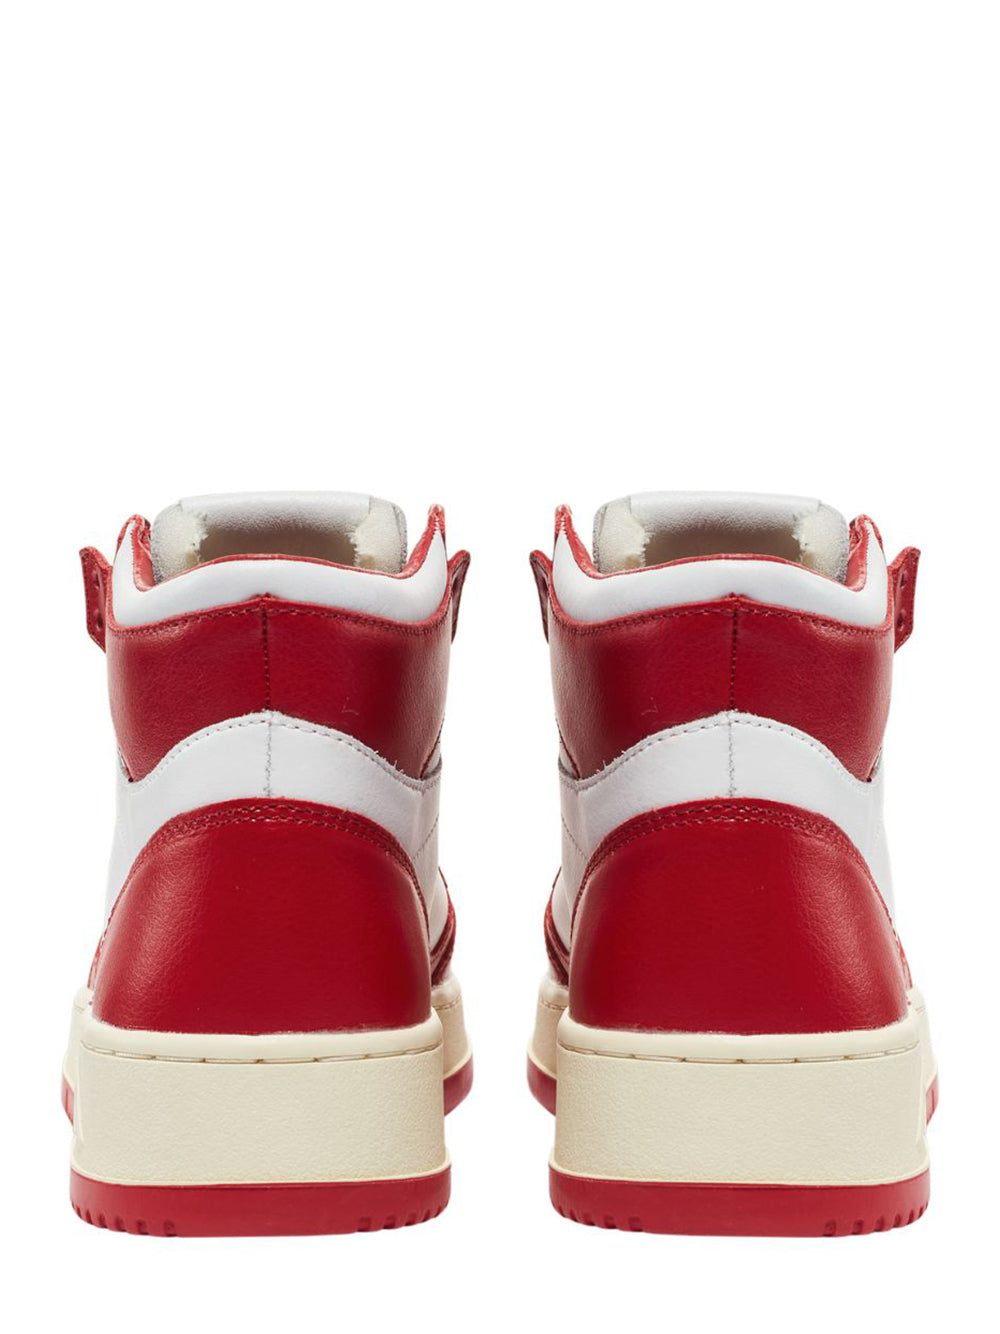 Medalist Mid Sneakers In Two-Tone Leather (White And Red) (Women)